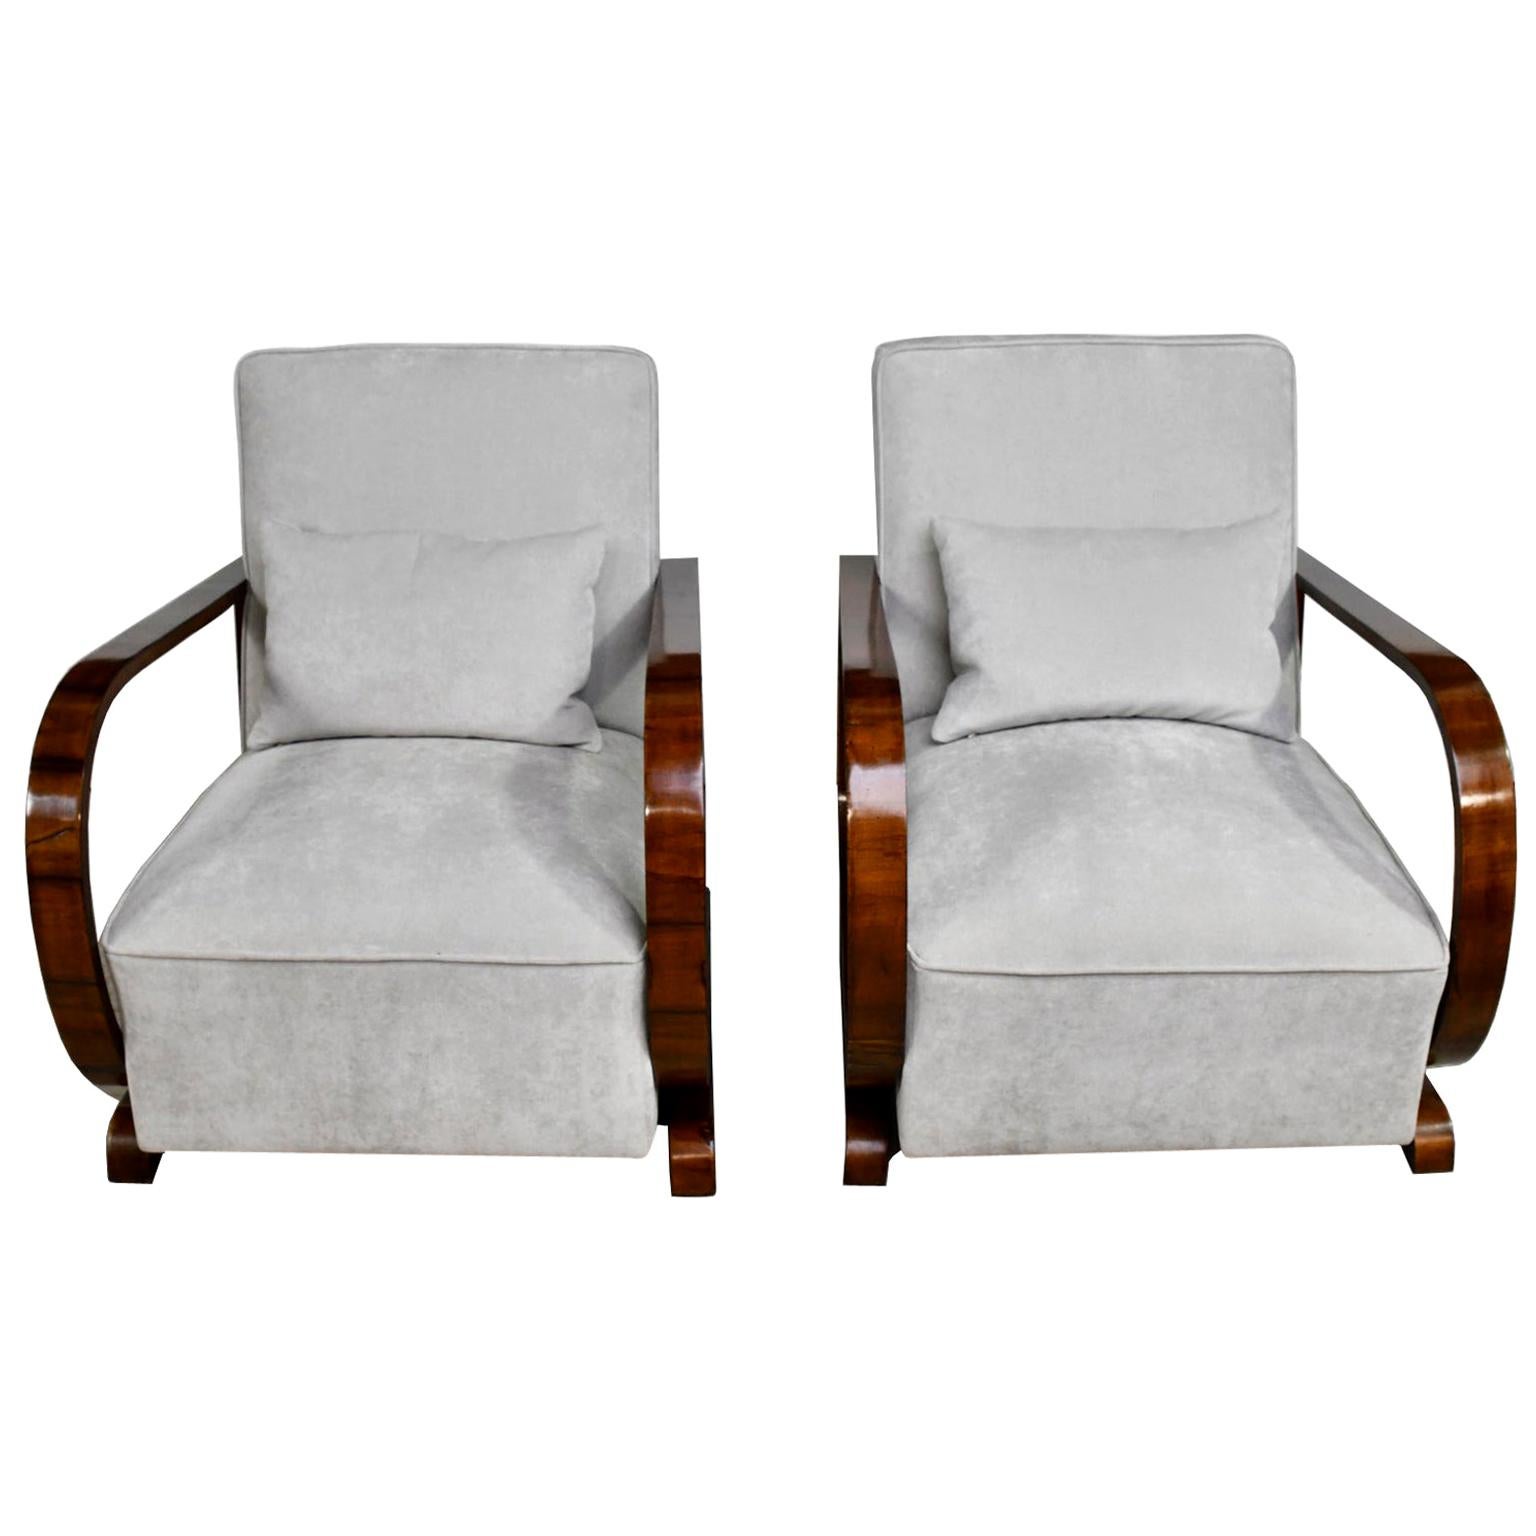 Pair of Viennese Art Deco Armchairs in Walnut with Grey Upholstery, Austria